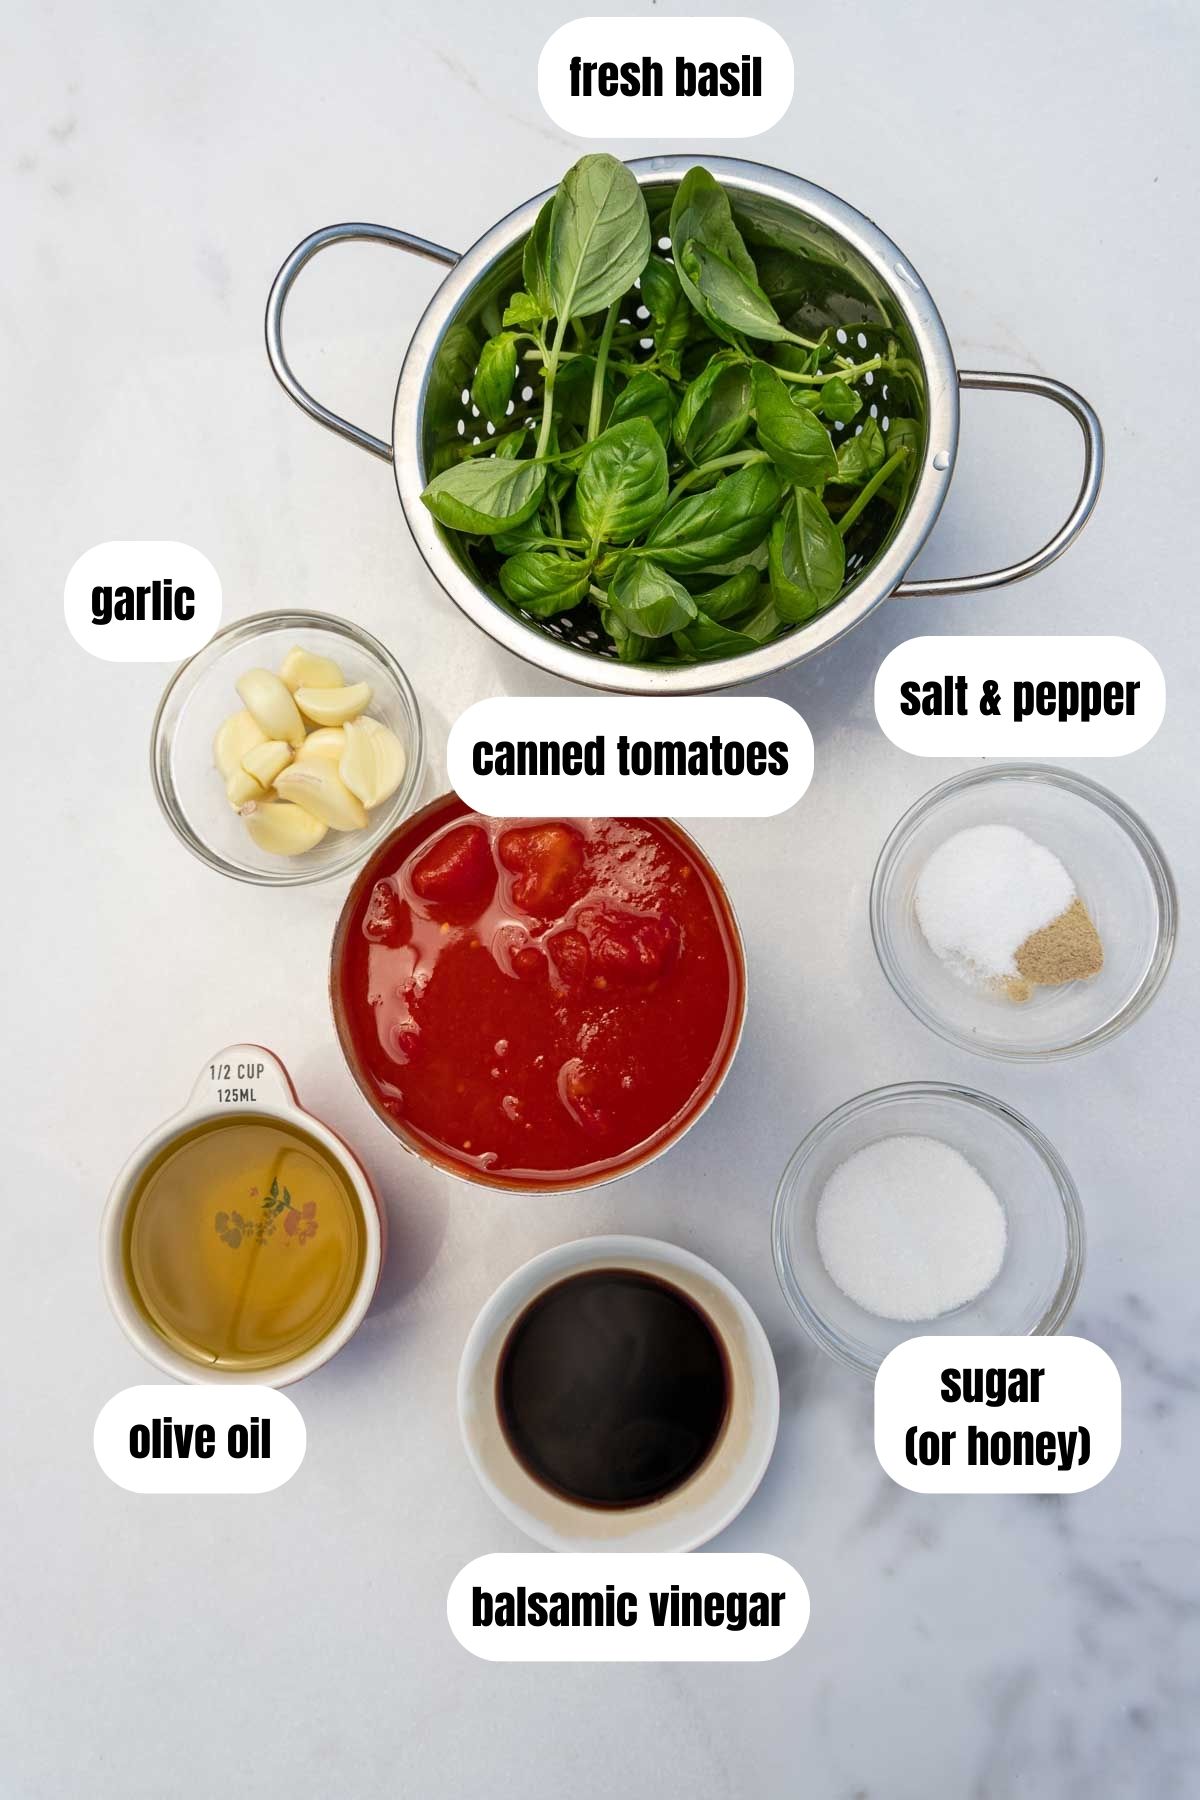 All ingredients for marinara sauce labelled including canned tomatoes, fresh basil, olive oil, balsamic vinegar, garlic, sugar or honey and salt and pepper.